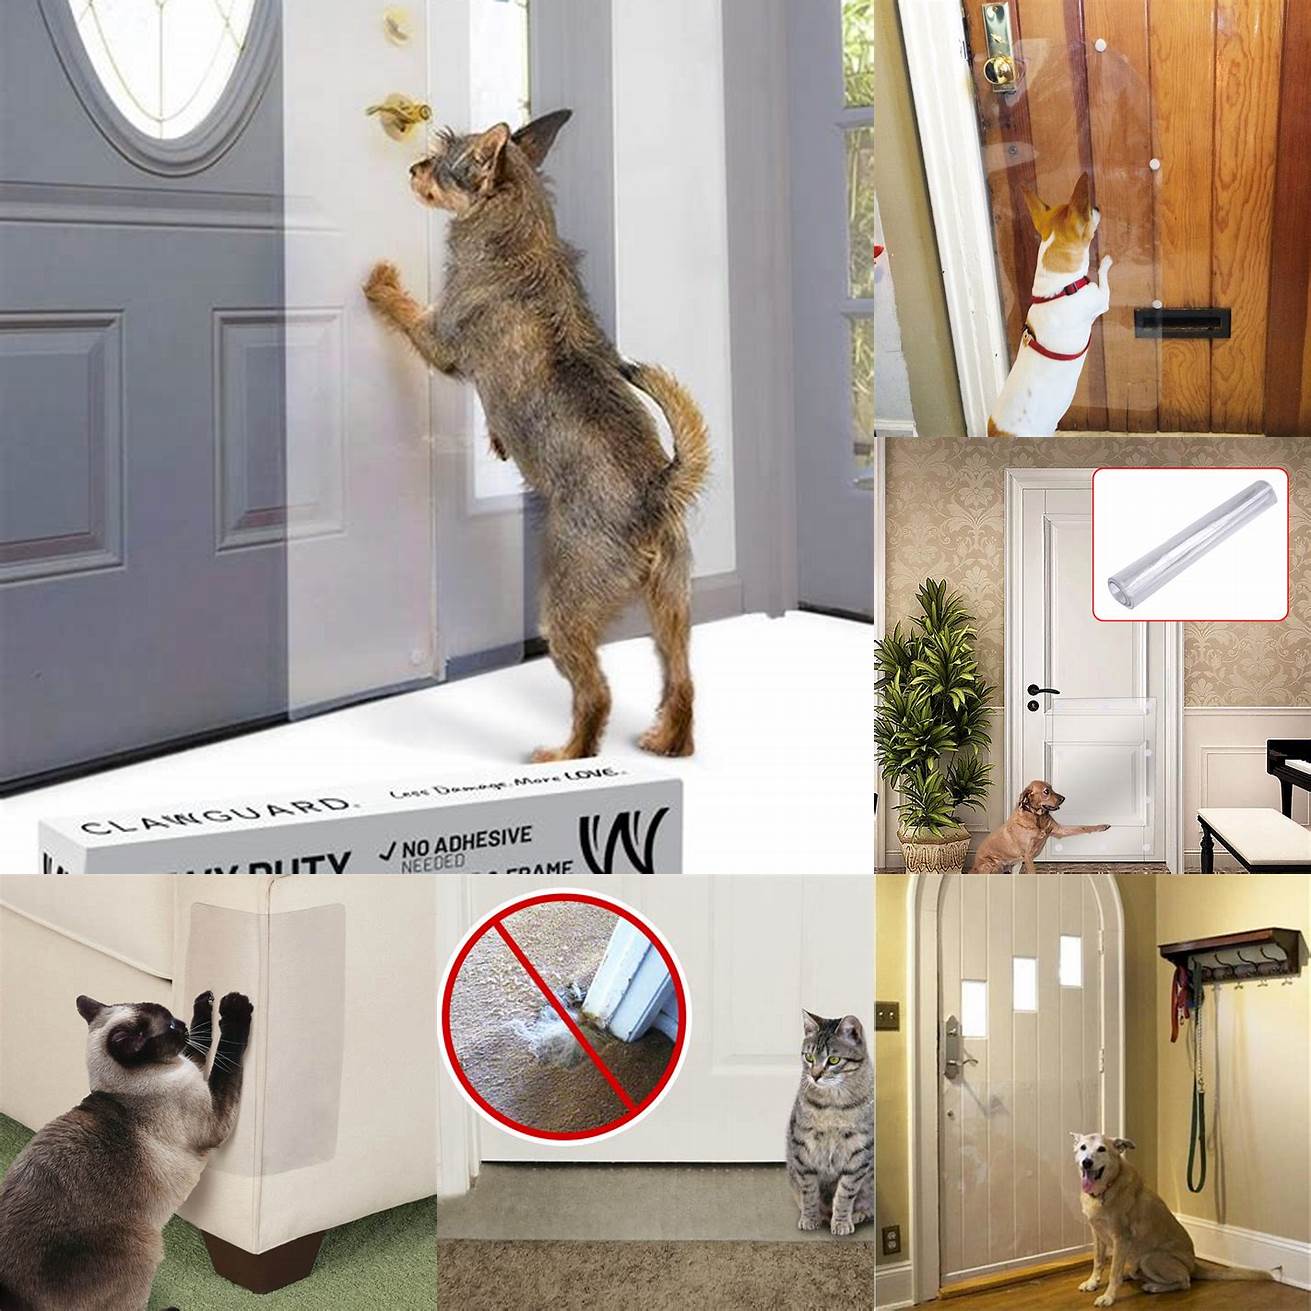 Protects your door from claw marks and damage